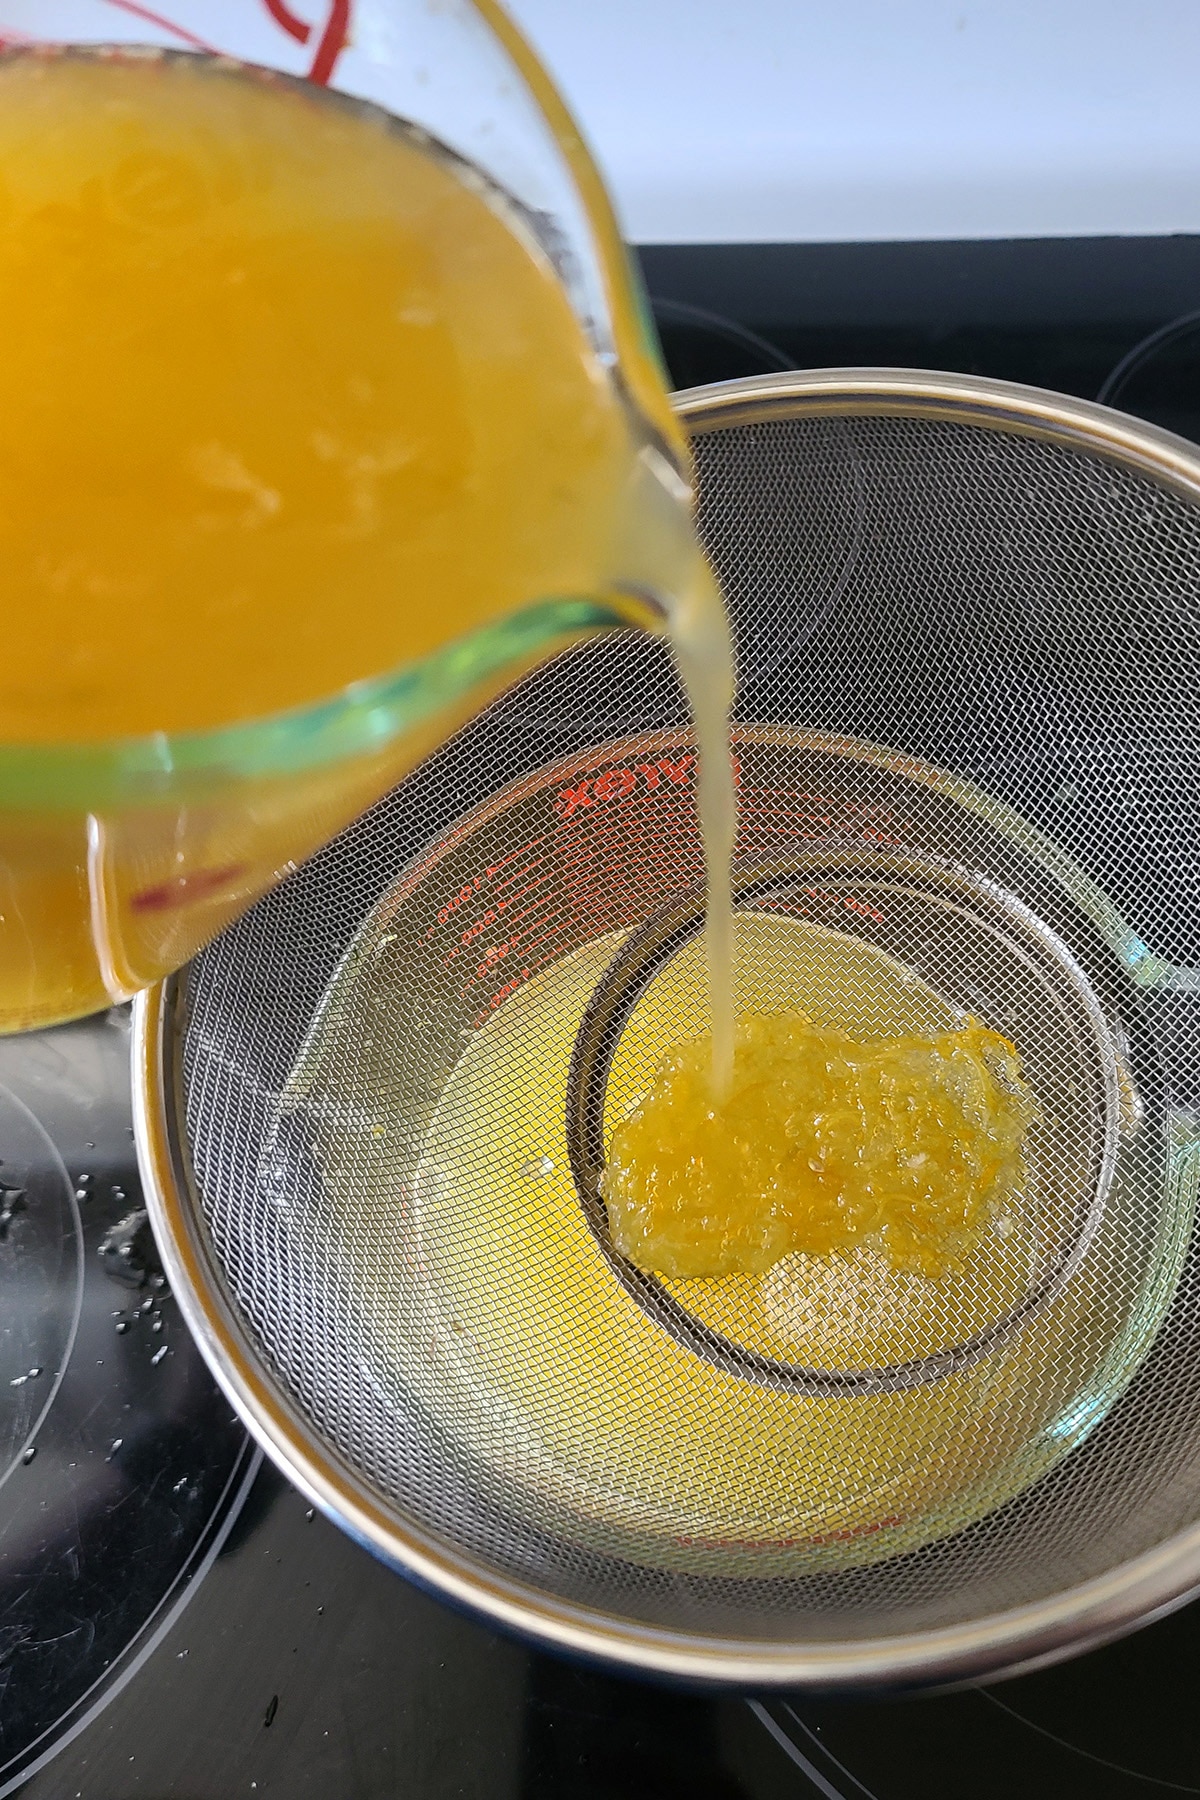 The sour mix being poured through a strainer to remove the zest.